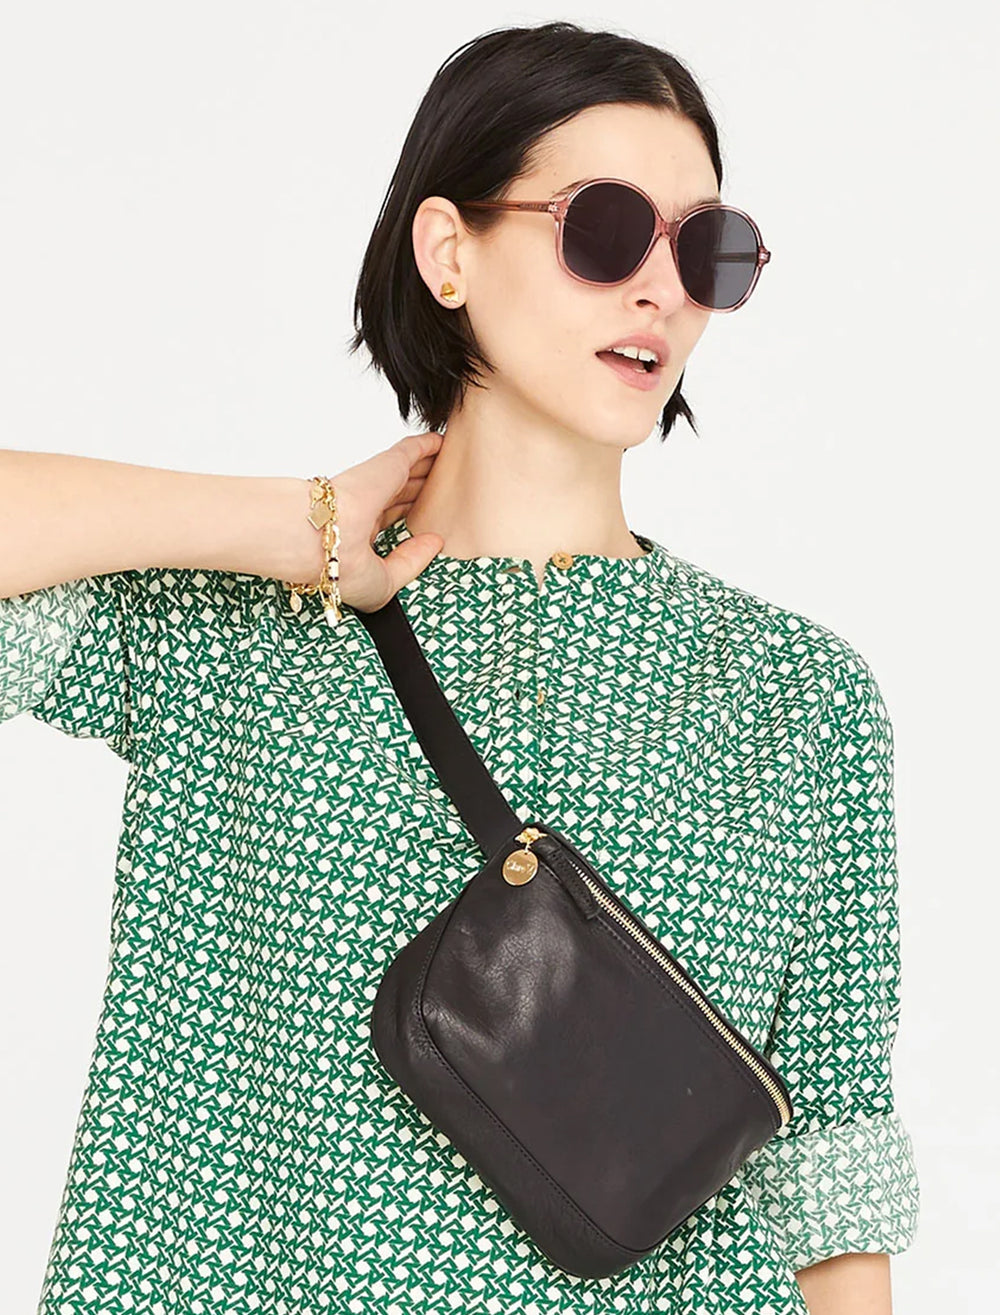 Womens Clare V. Petit Henri Pouch Black  Clare V. Bags & Small Accessories  - AICelluloids